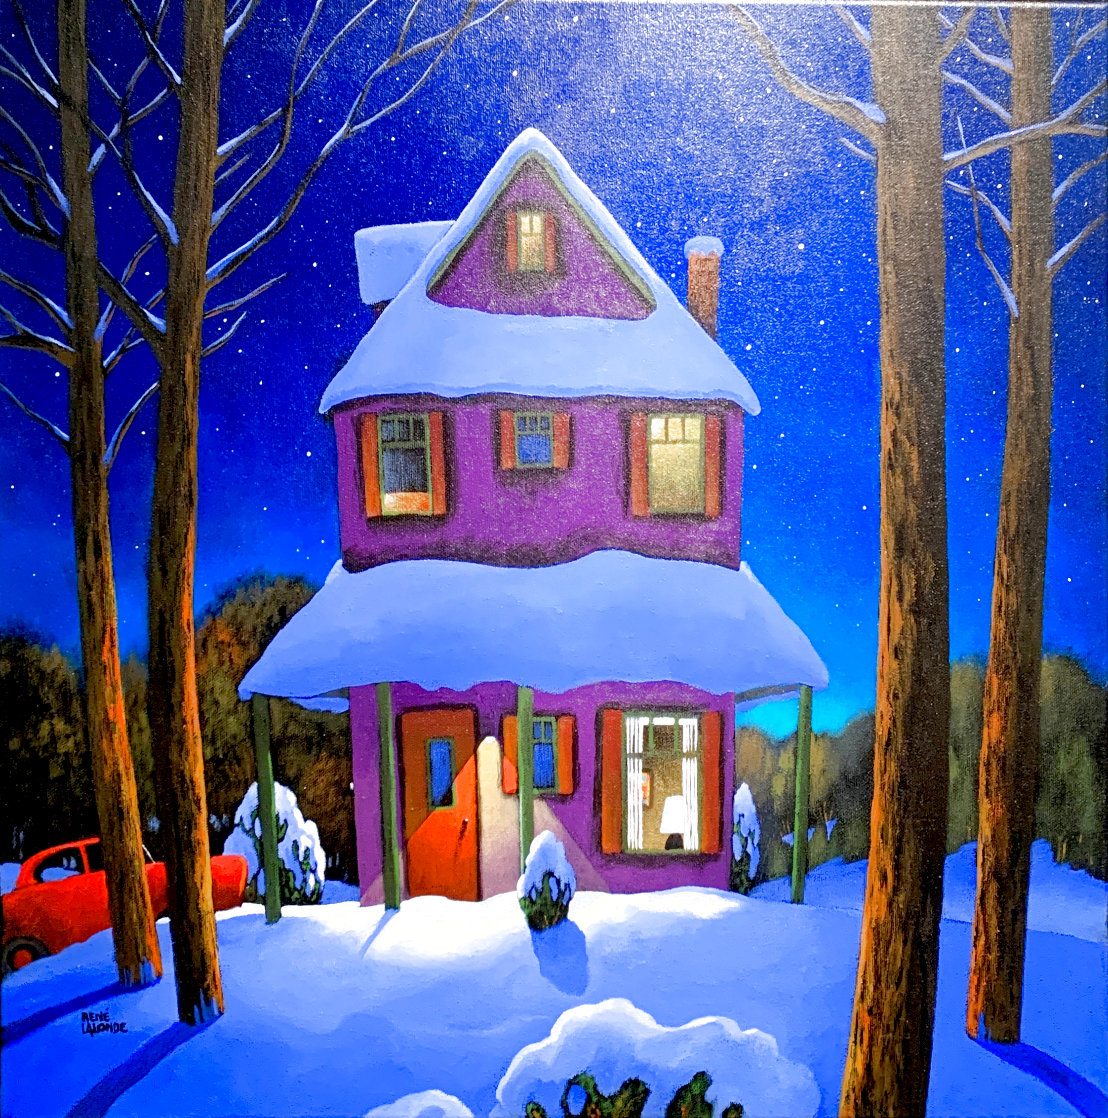 Winter Magic By Night 2019 27x27 Original Painting by Rene Lalonde